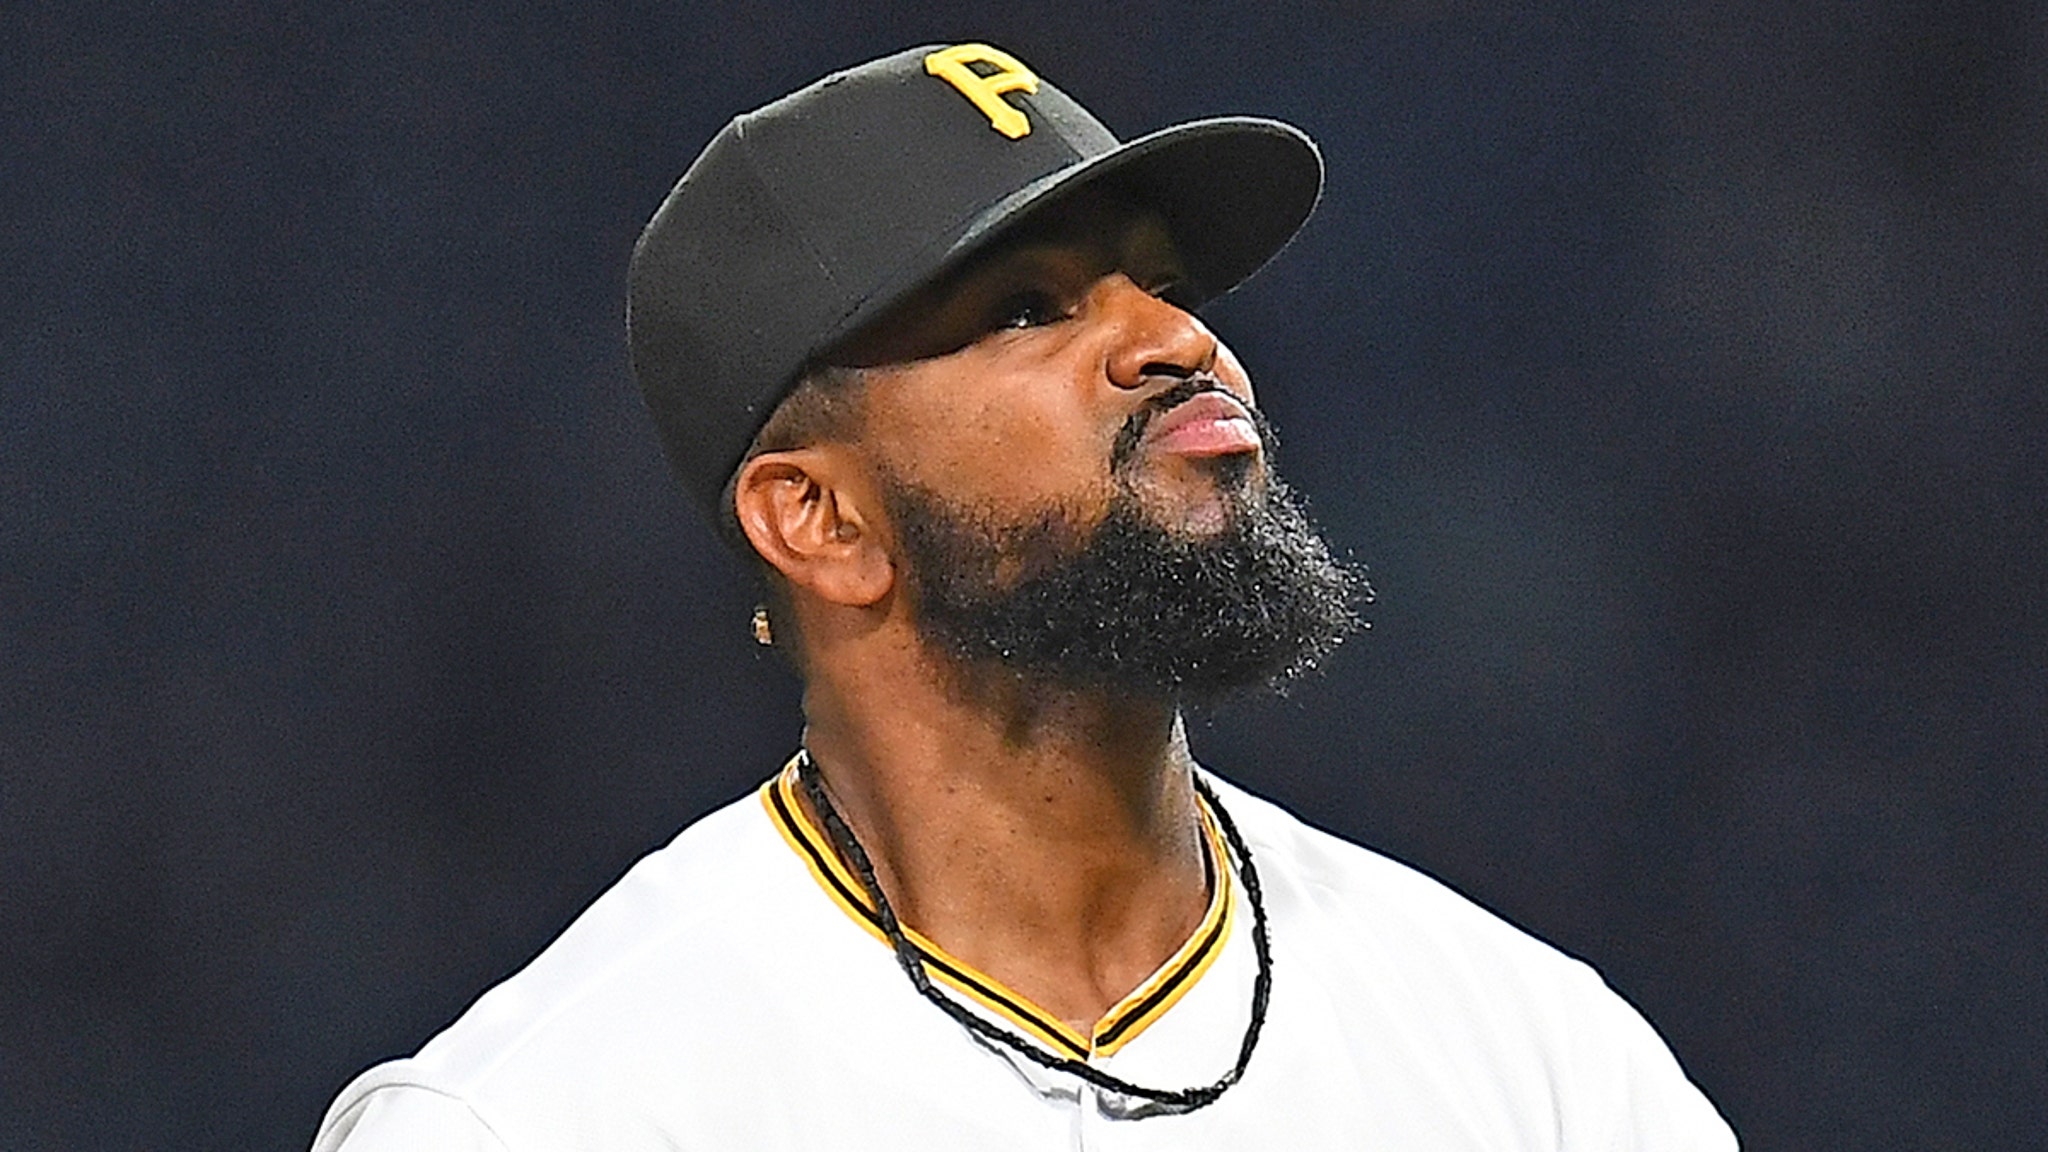 Felipe Vazquez Told Police He Attempted to Have Sex with 13-Year-Old Girl, News, Scores, Highlights, Stats, and Rumors